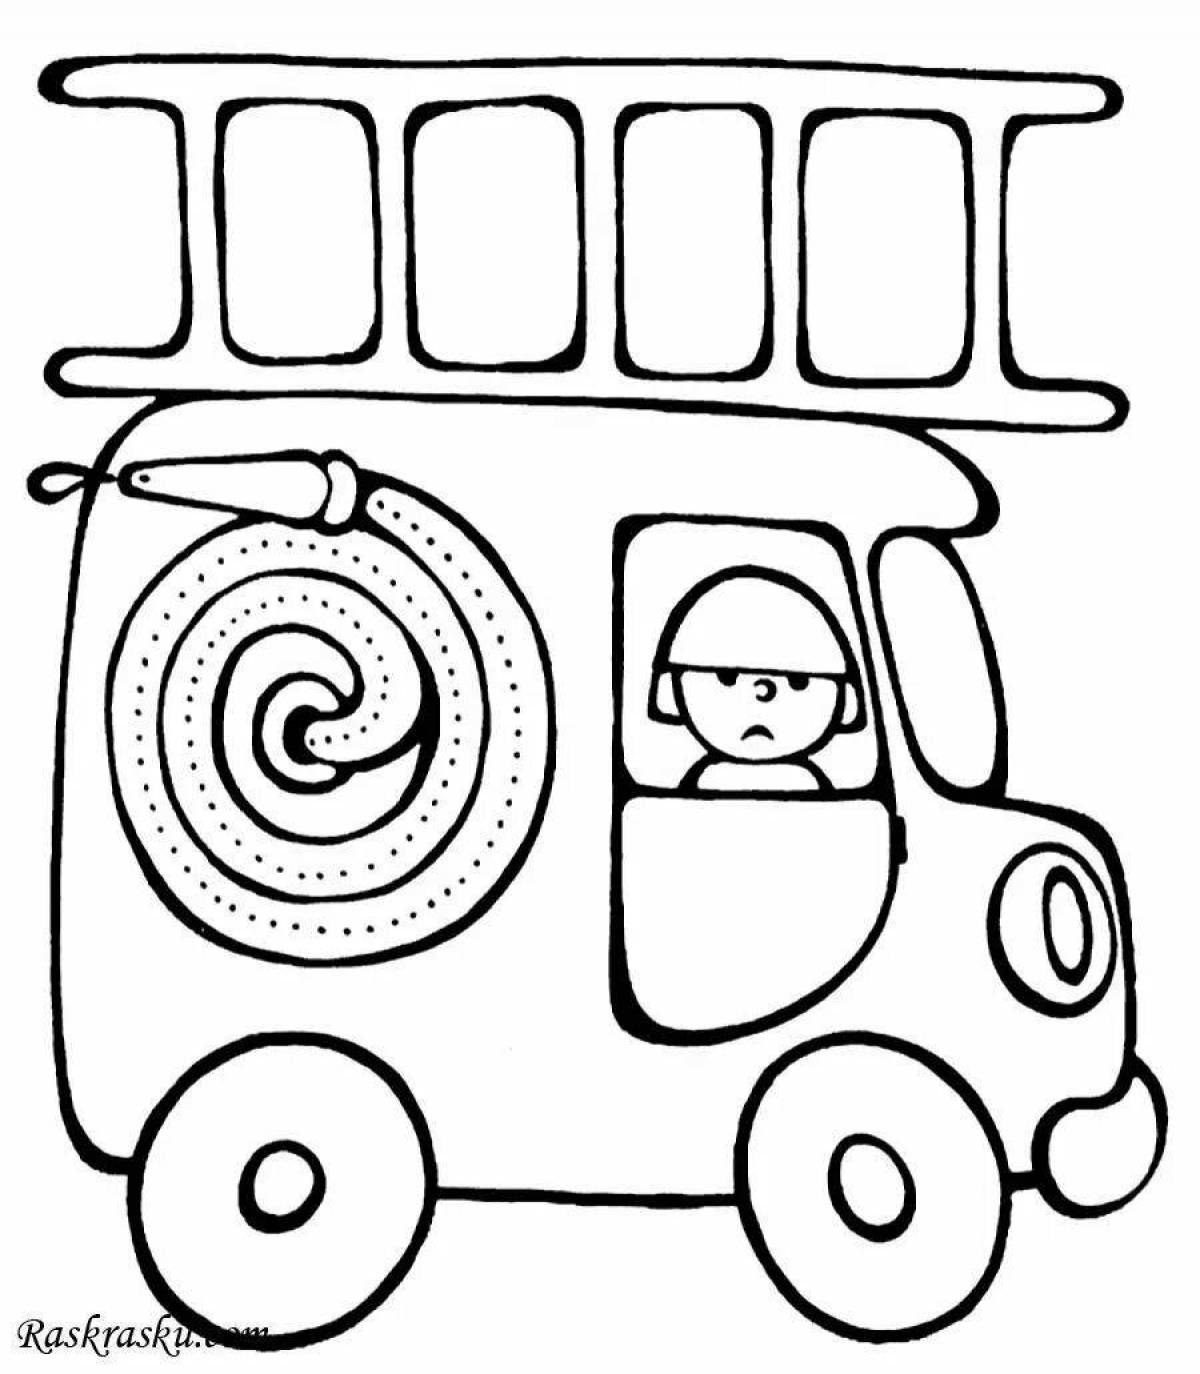 Awesome pre-k vehicle coloring book